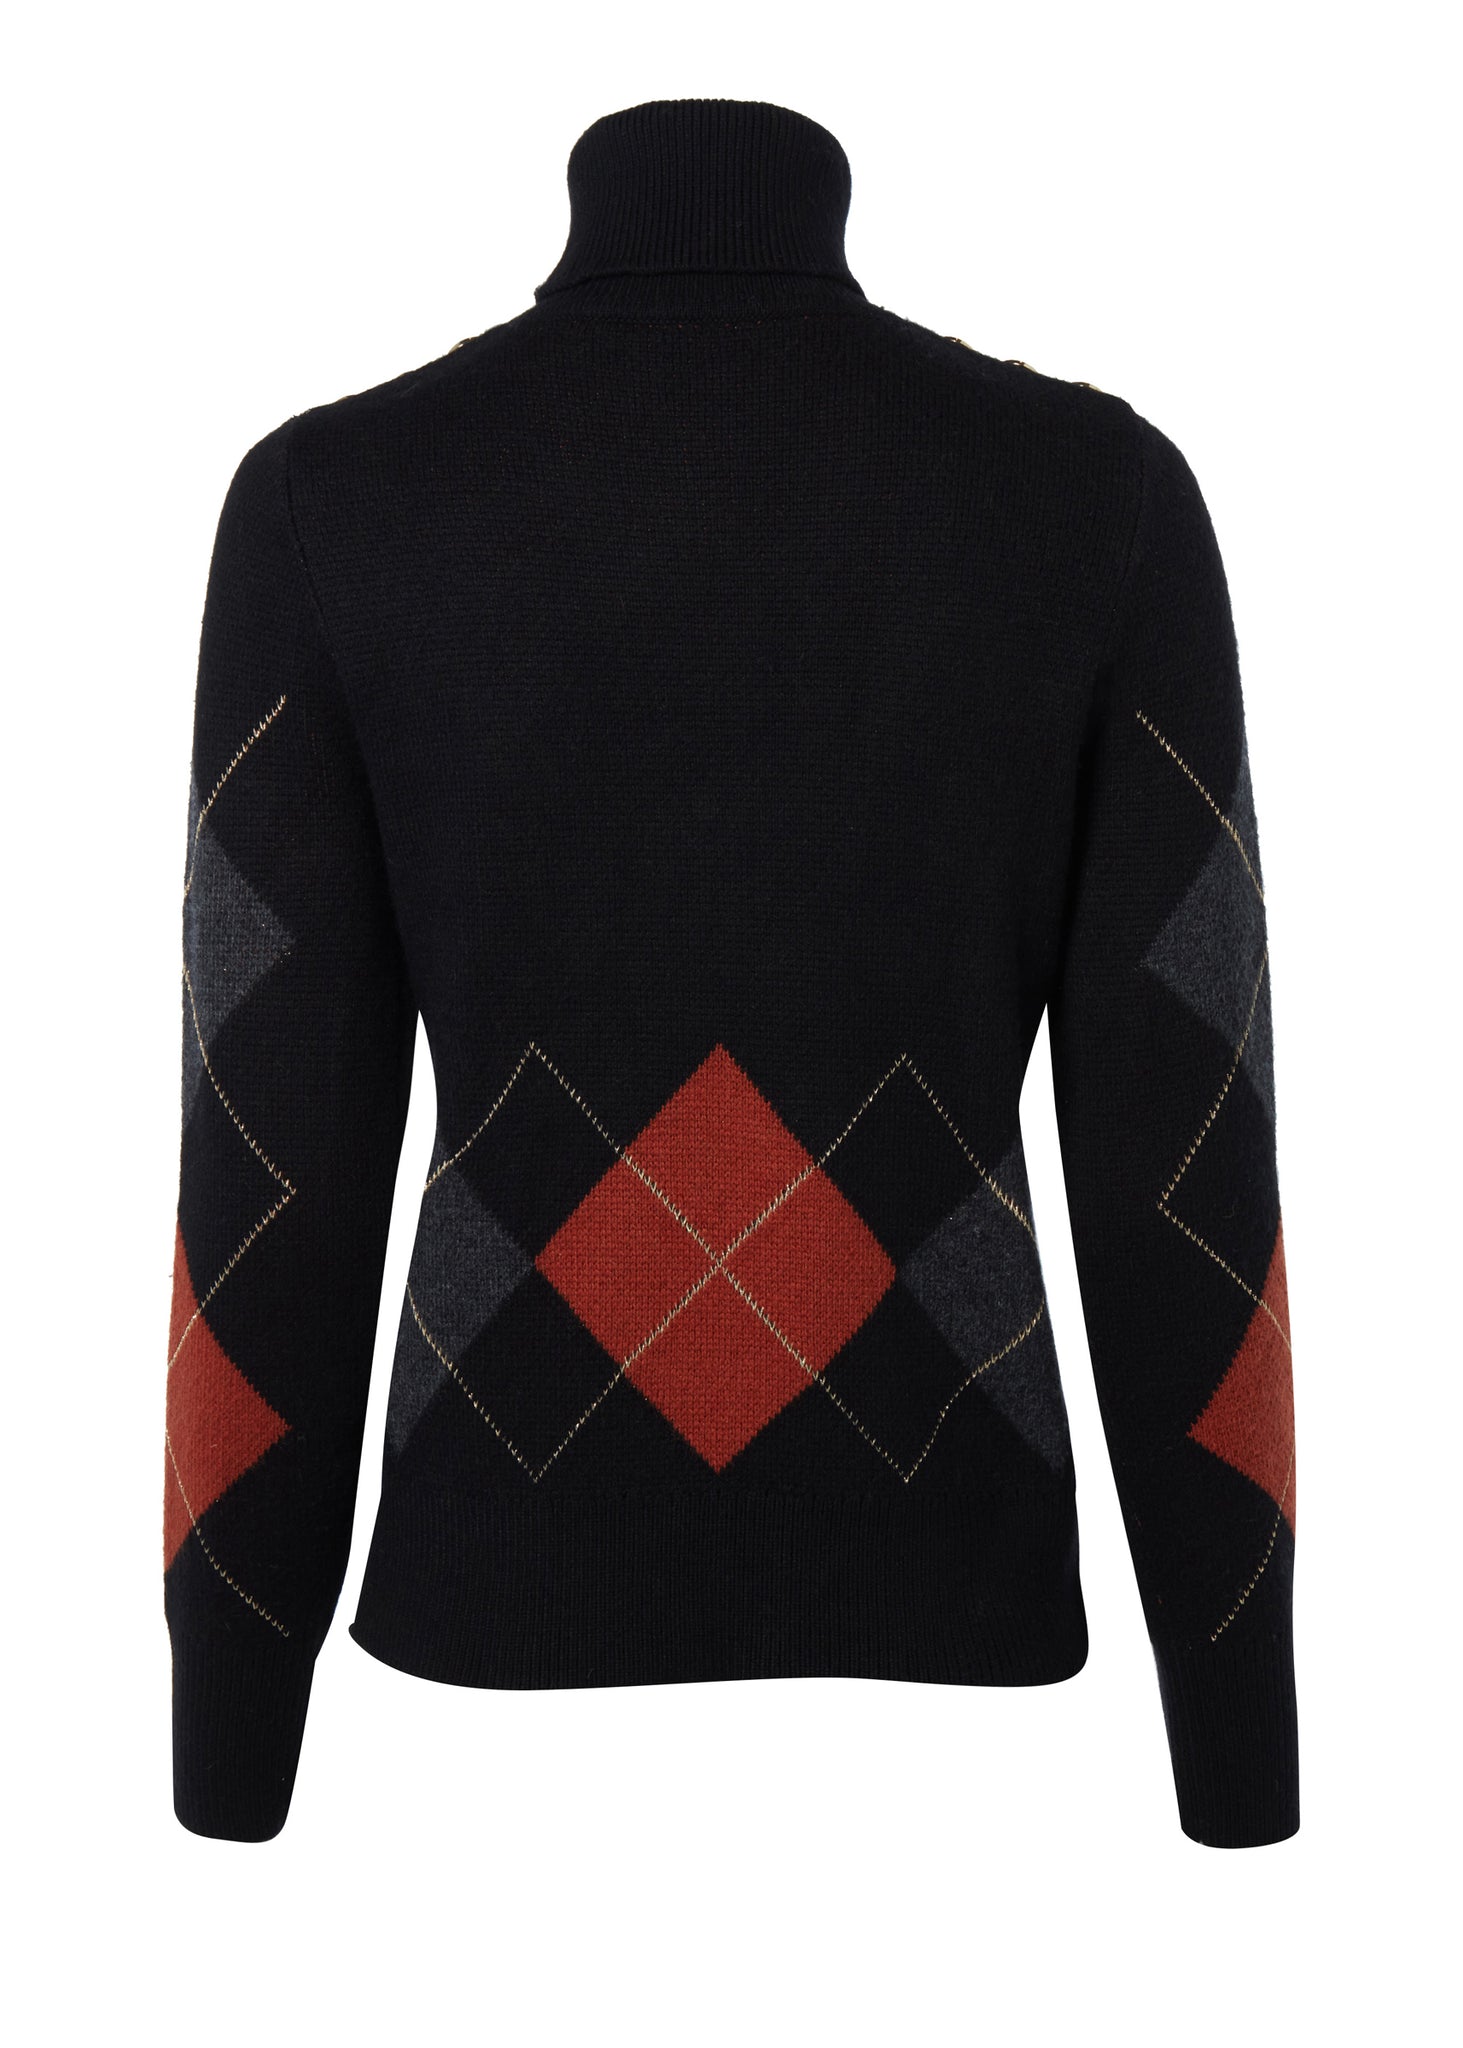 back of a classic roll neck black argyle jumper with grey and red diamonds and gold button detail on the cuffs and collar